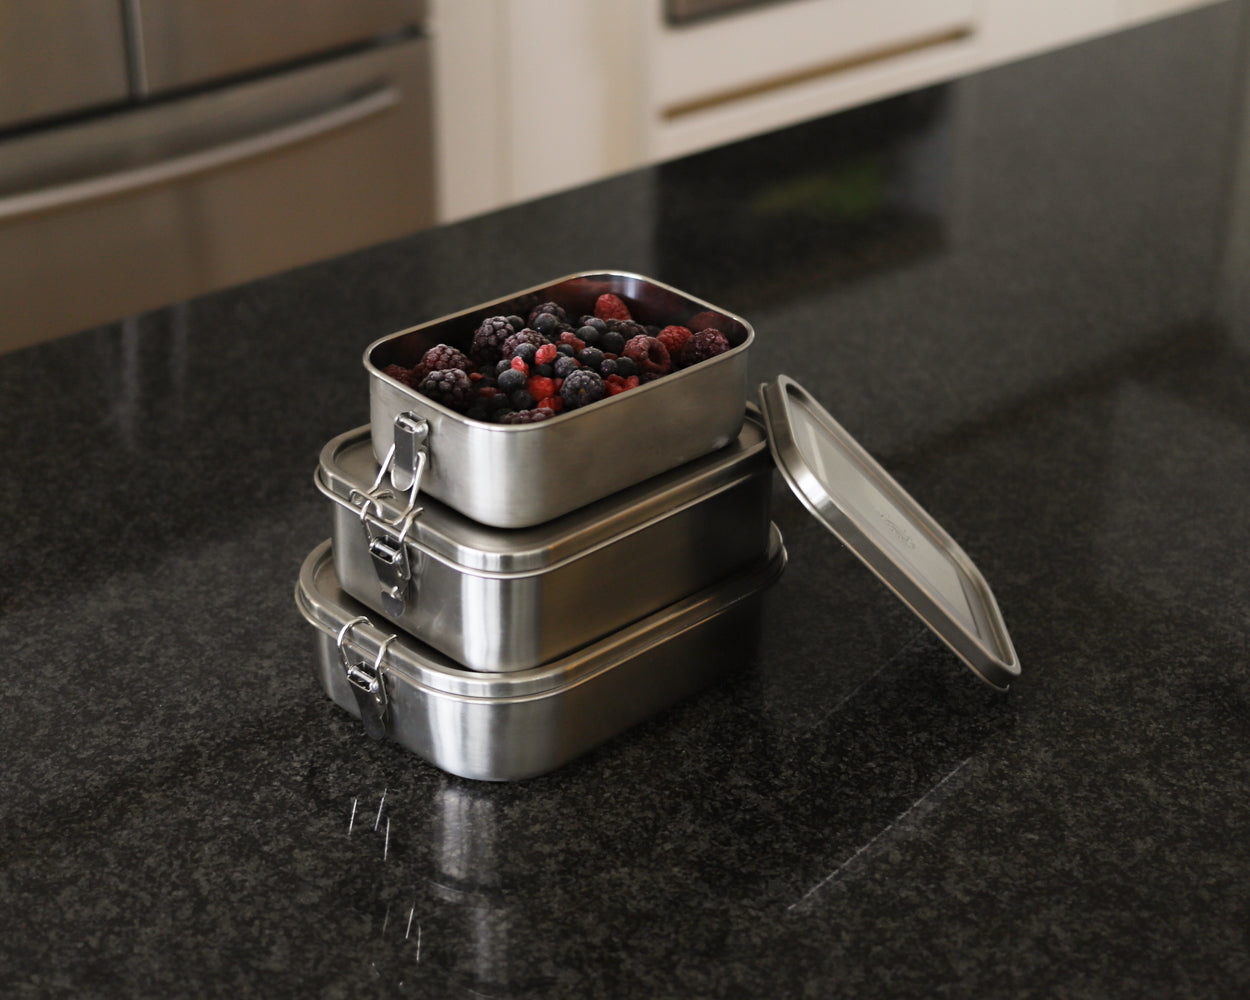 https://cdn.shopify.com/s/files/1/0030/2333/9618/files/frozen_fruit_in_stainless_steel_containers_by_Net_Zero_co.JPG?v=1578905395